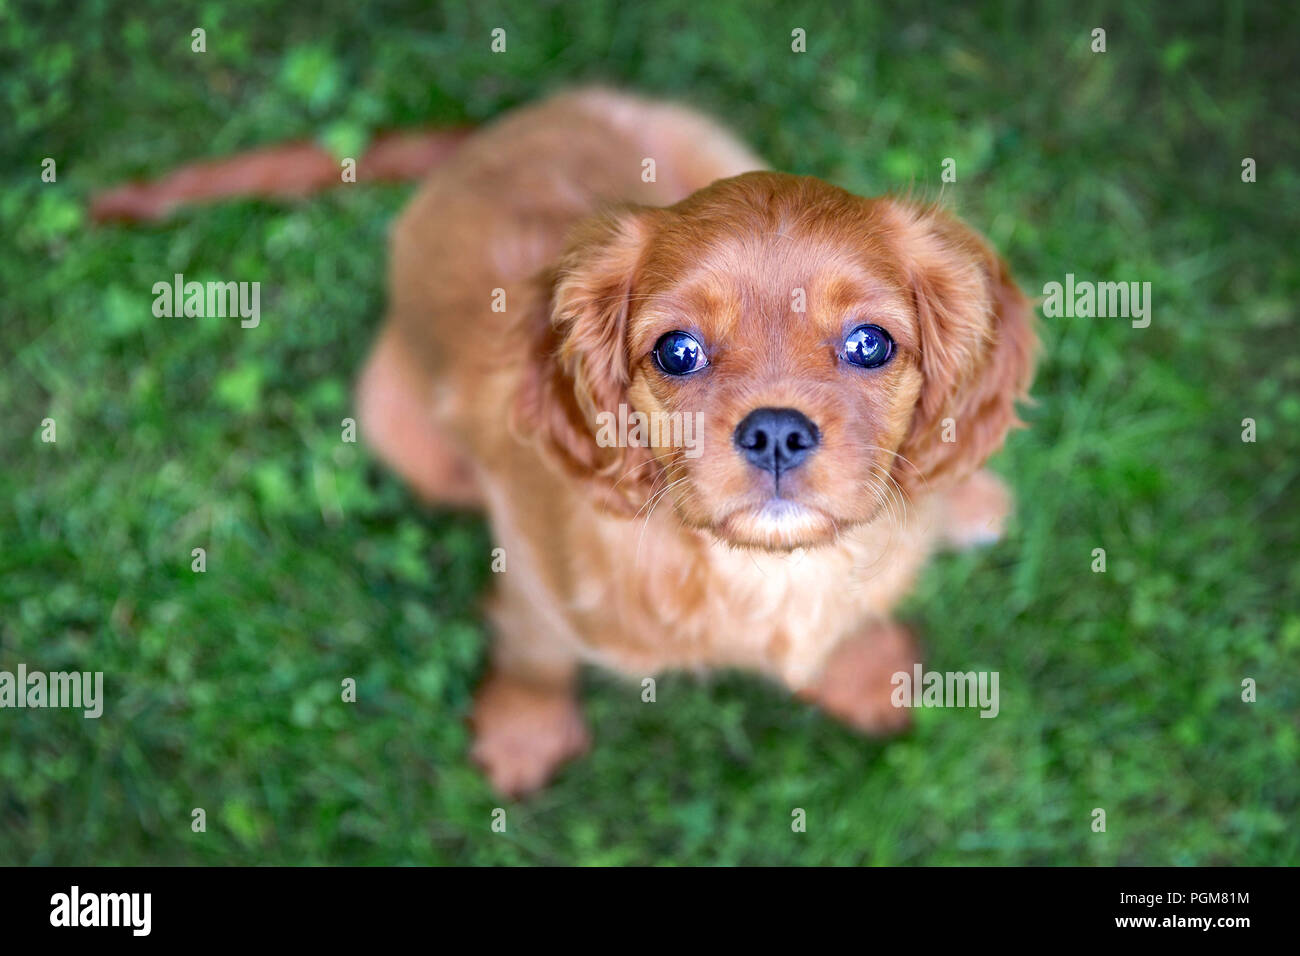 Adorable puppy sitting on the green grass Stock Photo